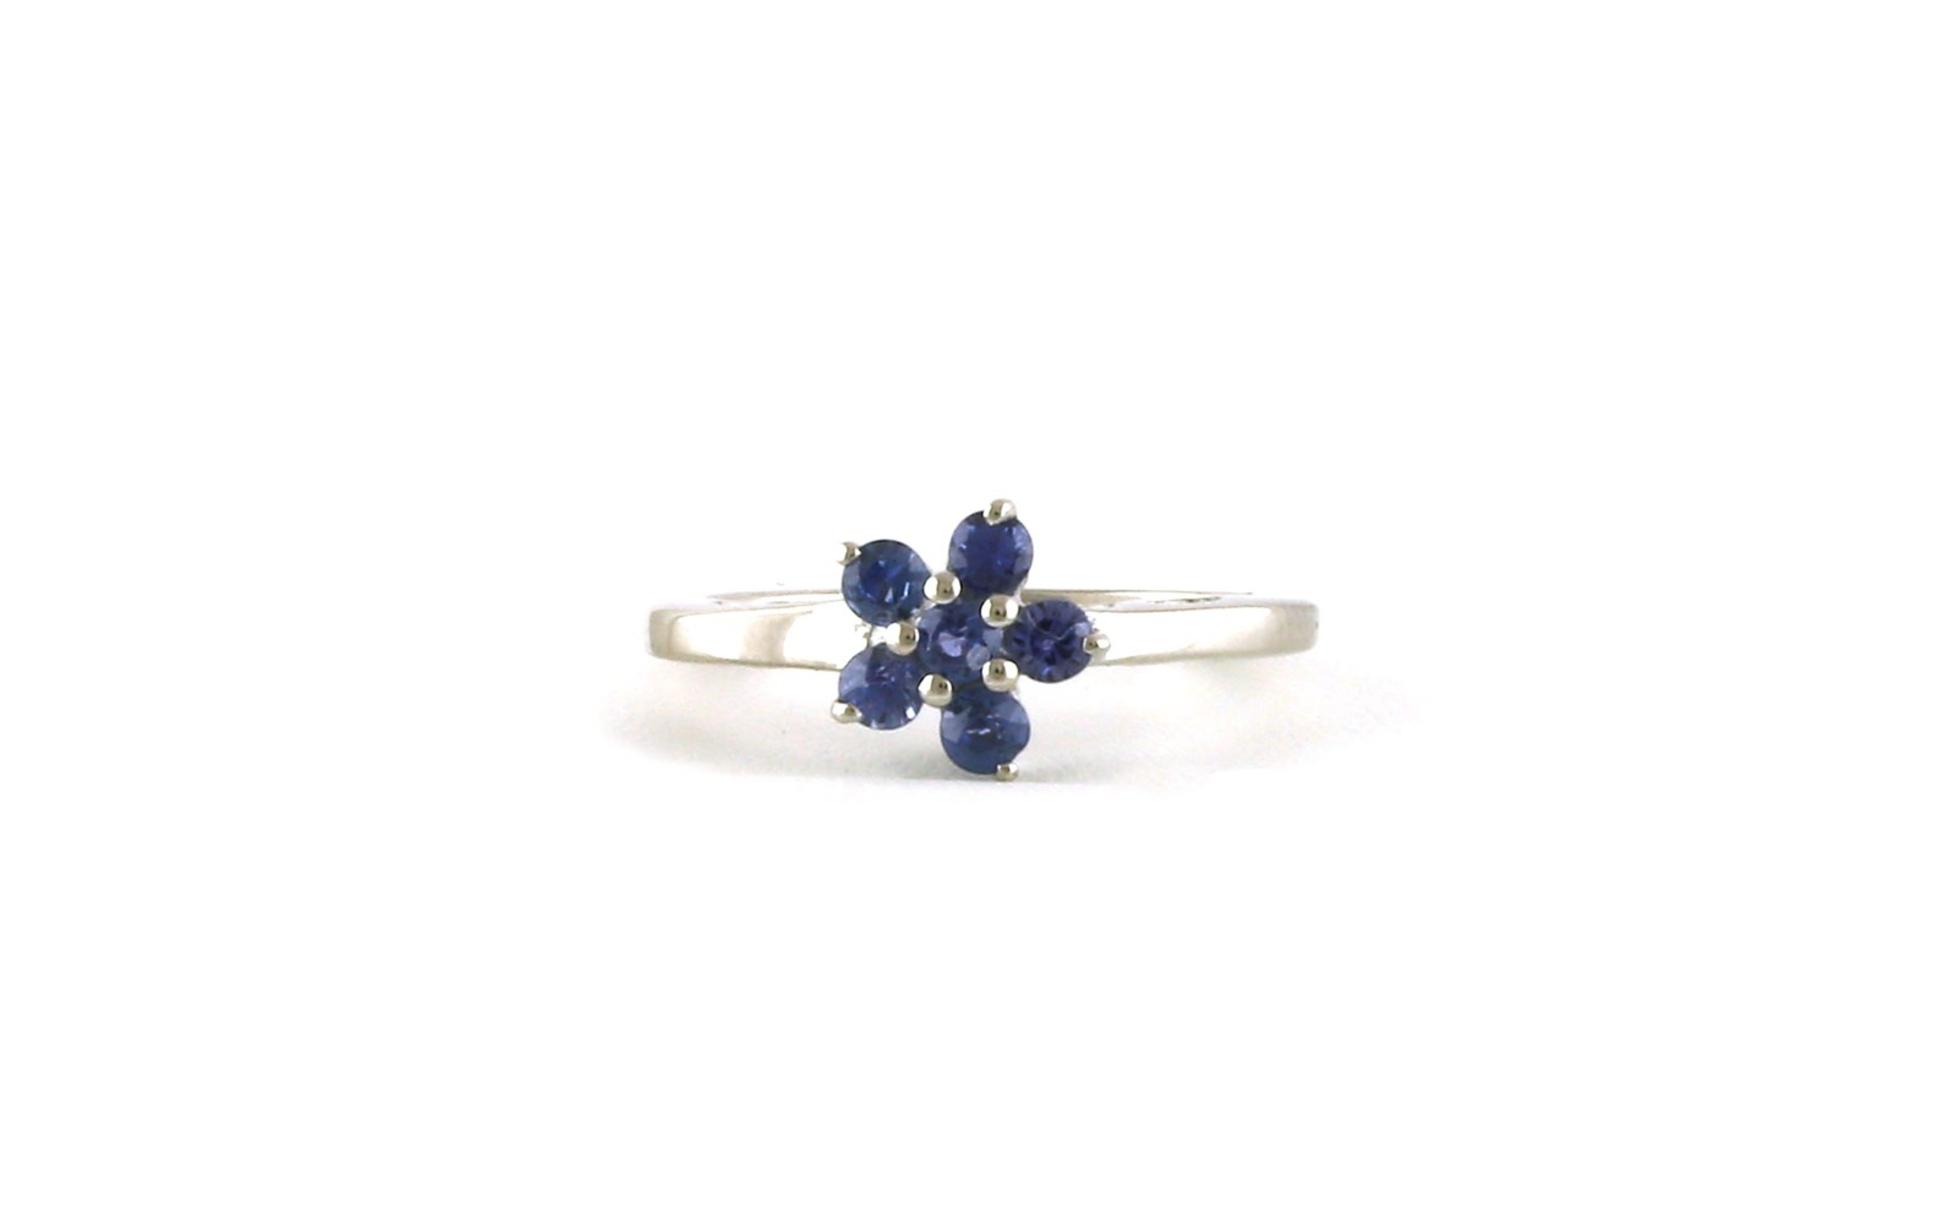 6-Stone Flower Cluster Montana Yogo Sapphire Ring in Sterling Silver (0.41cts TWT)